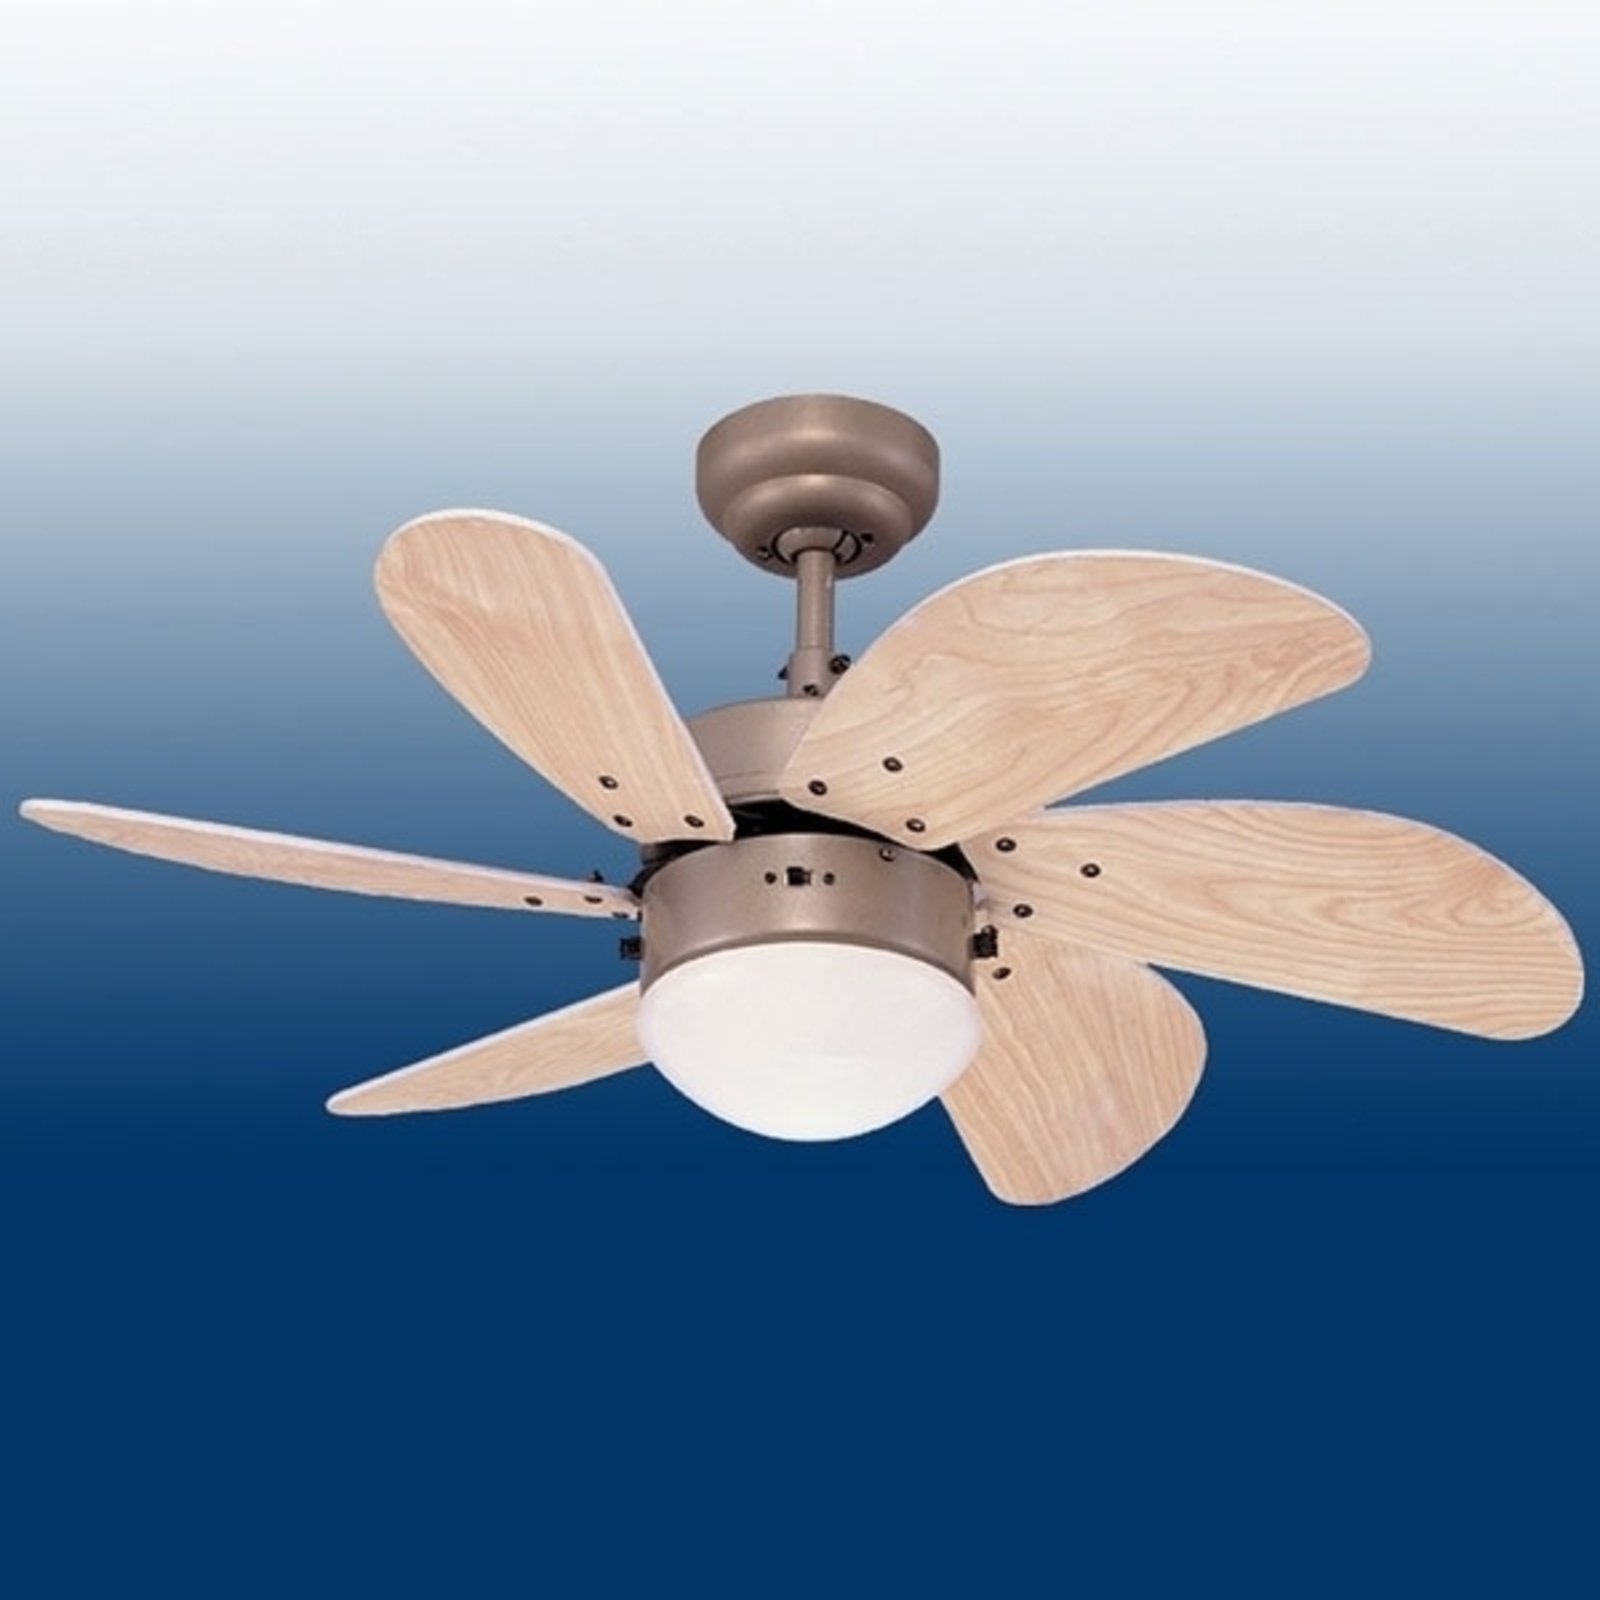 Westinghouse Turbo Swirl fan with 2 switches